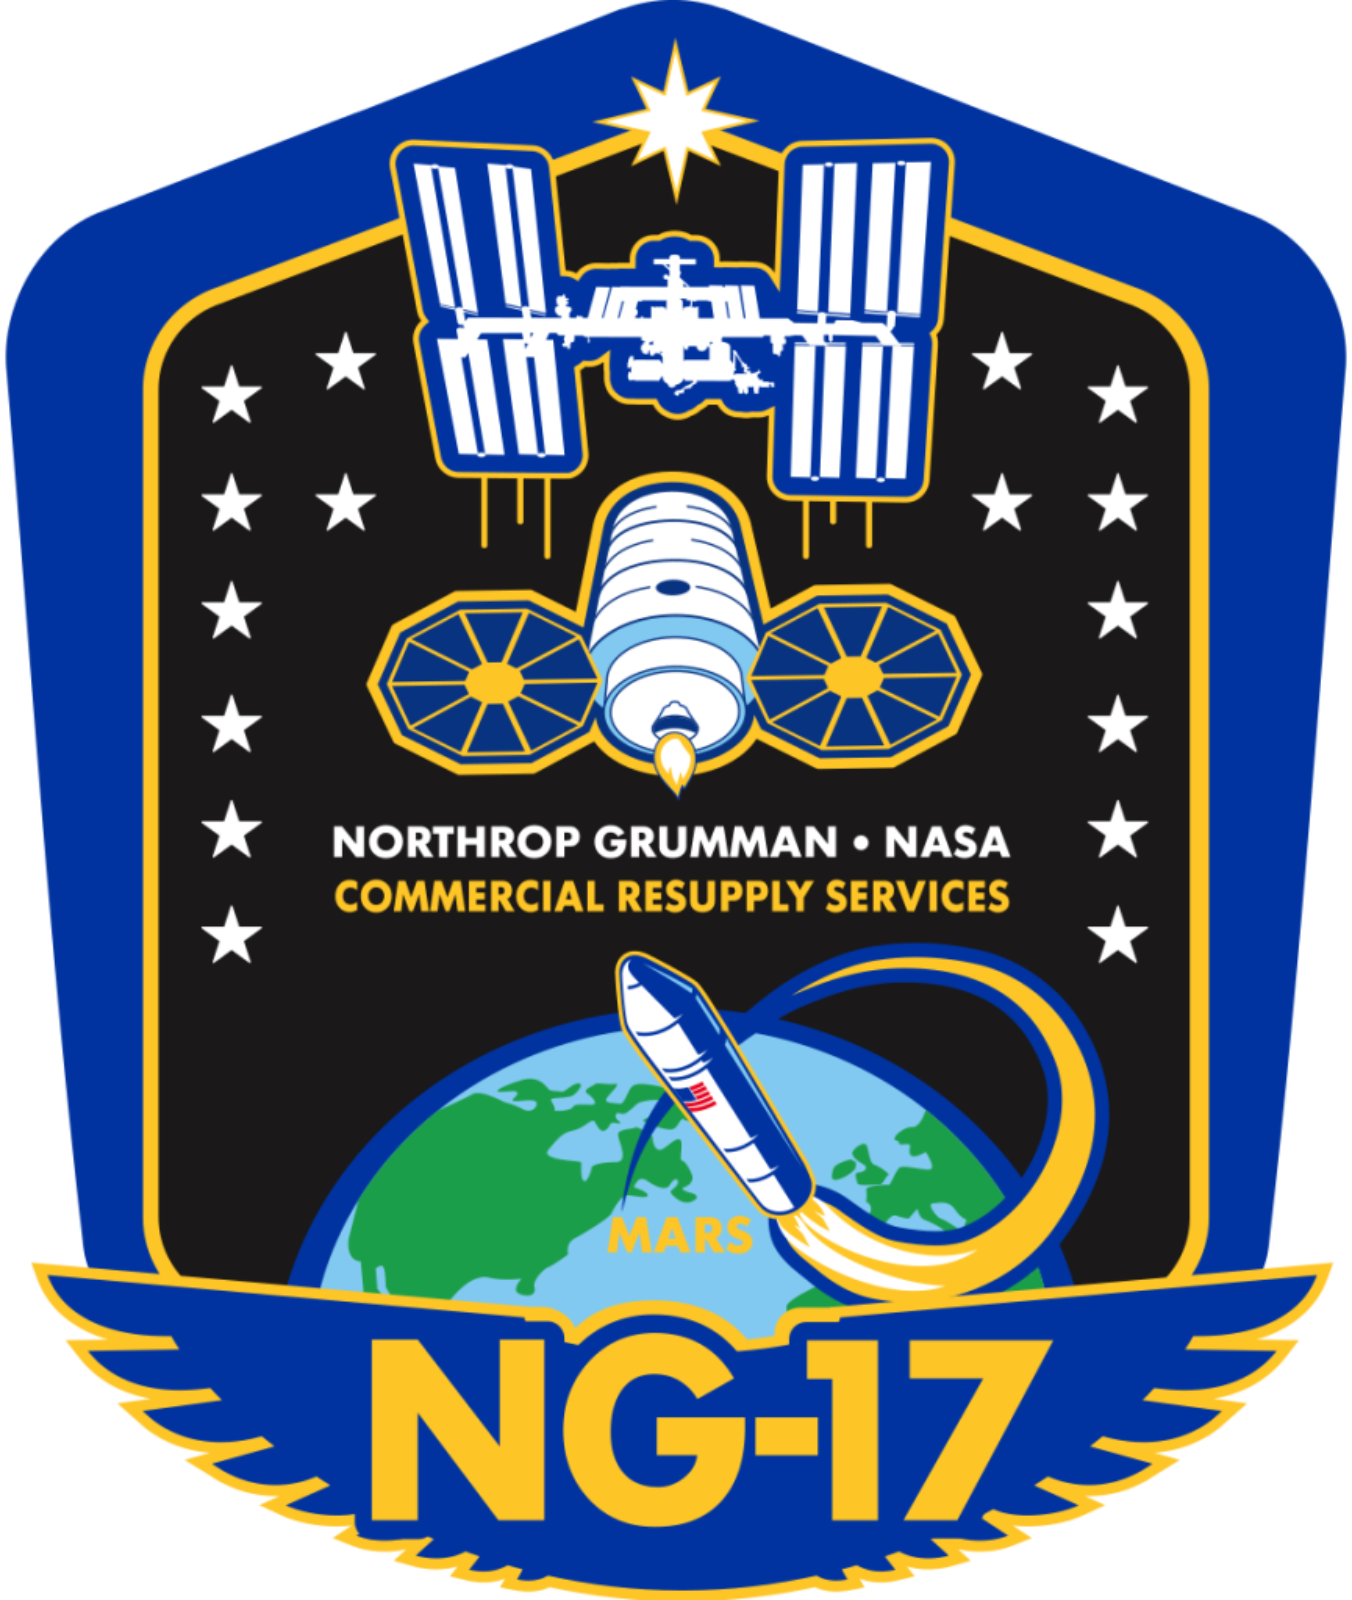 Mission patch for Cygnus CRS-2 NG-17 (S.S. Piers Sellers)